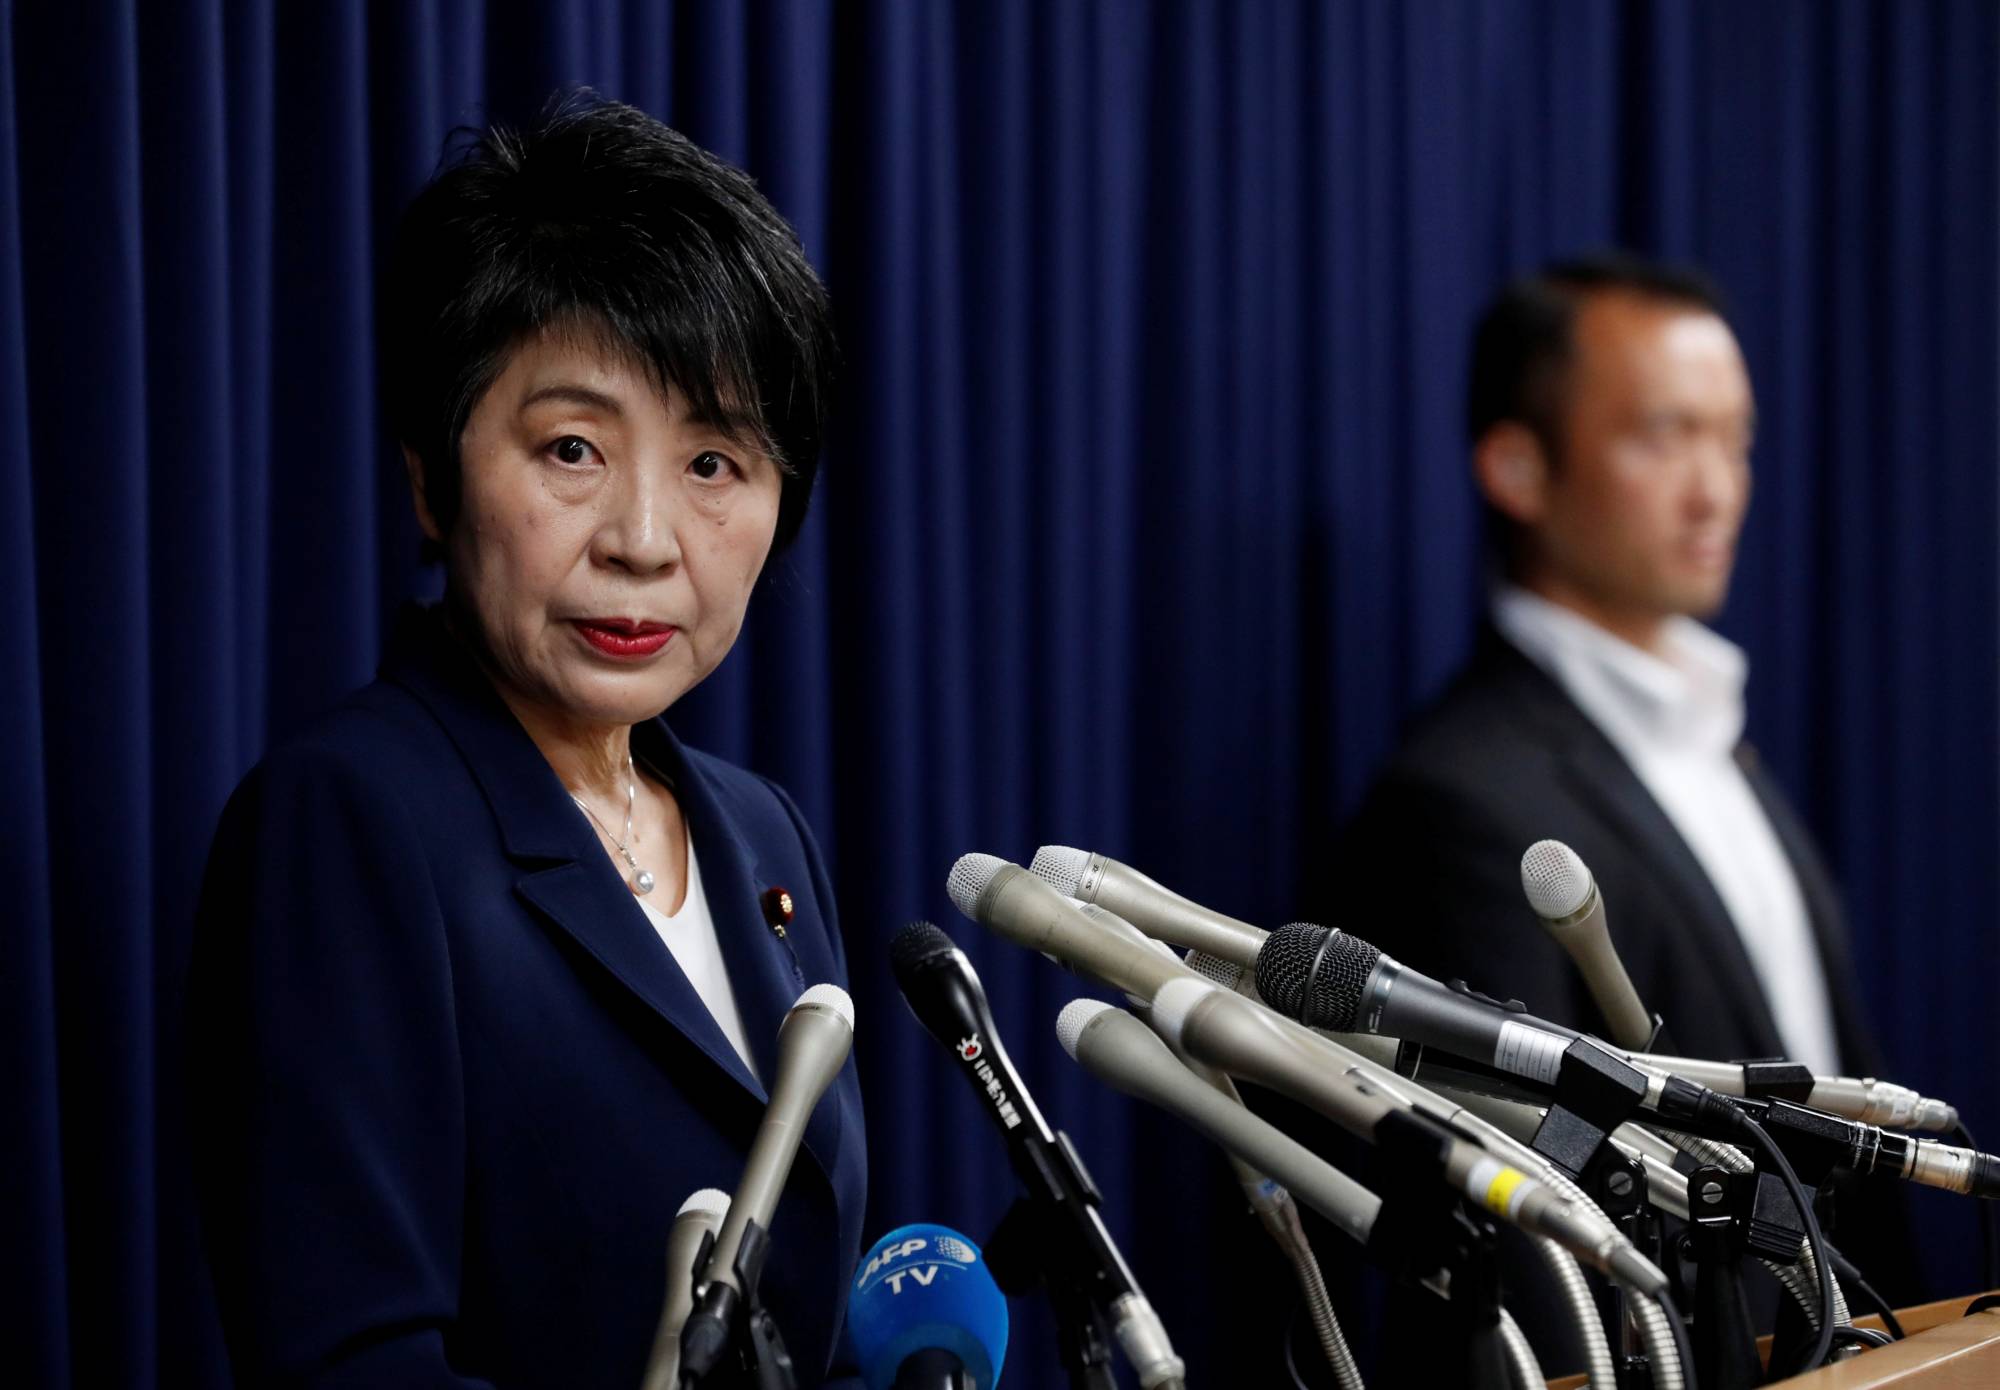 Justice Minister Yoko Kamikawa signed the death warrants for 13 doomsday Aum Shinrikyo cult members in July 2018, ignoring whatever appeals they had filed. | REUTERS